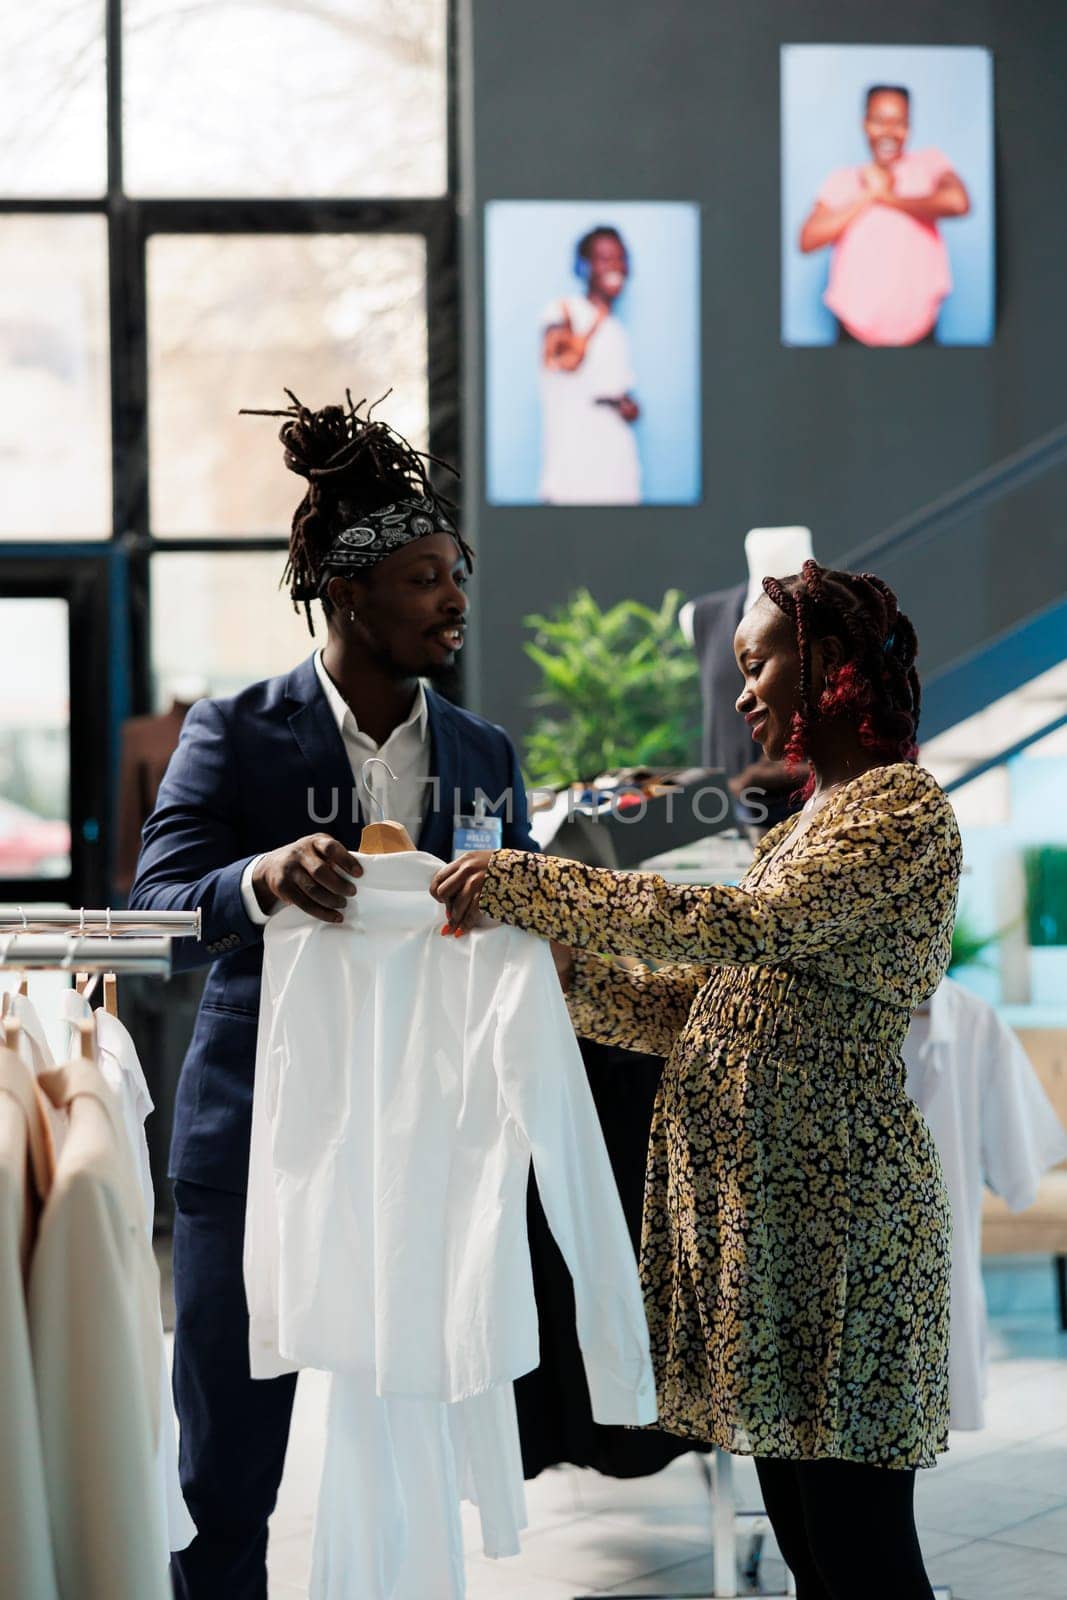 Showroom worker helping customer choosing white shirt, discussing clothes fabric in clothing store. African american pregnant woman buying fashionable maternity merchandise in modern boutique